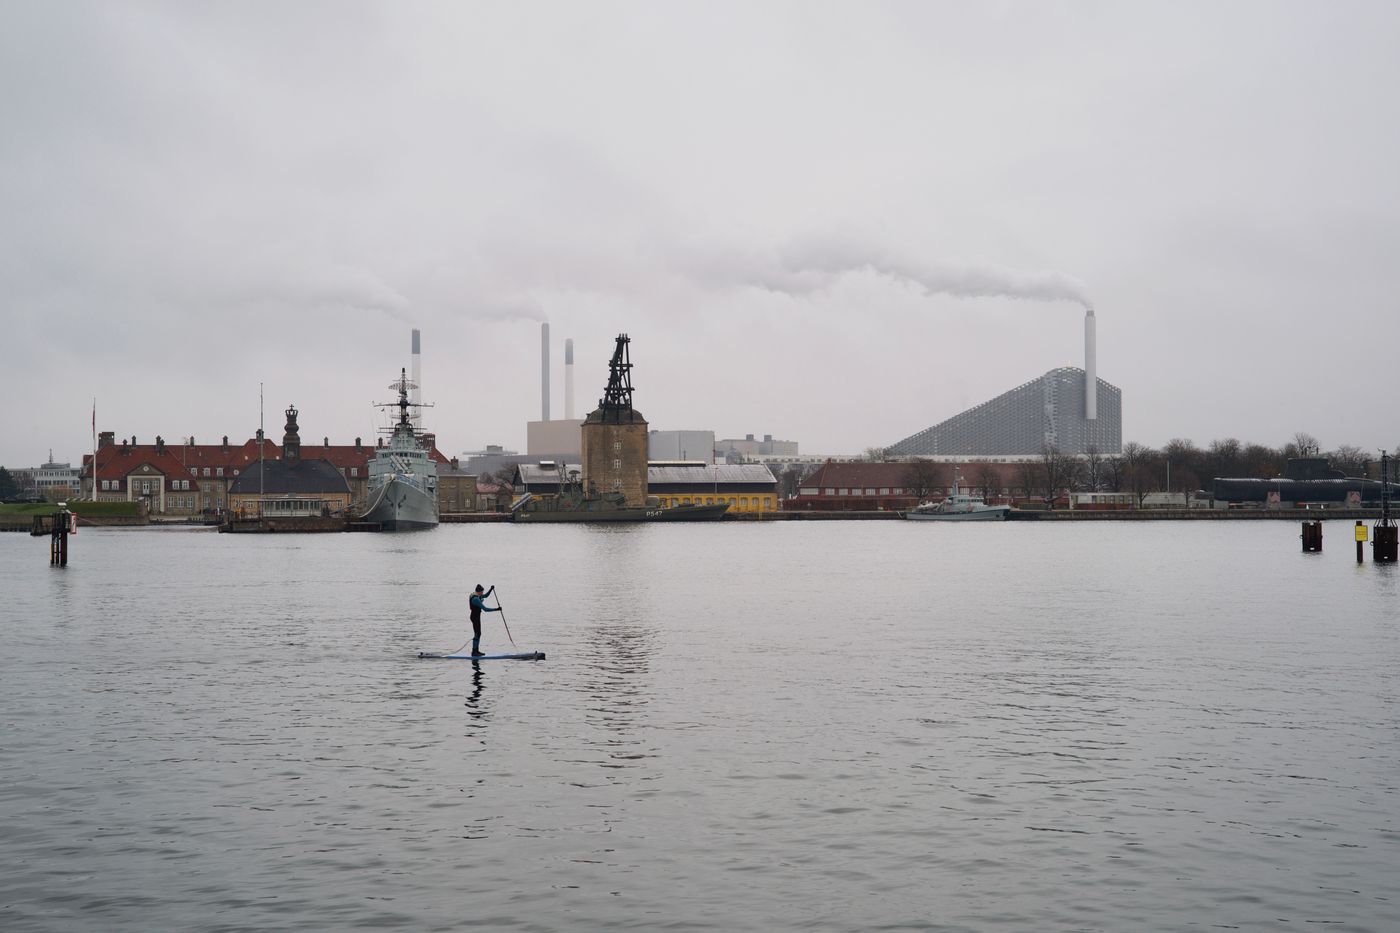 Paddle surfer with Copenhagen's CopenHill in the background